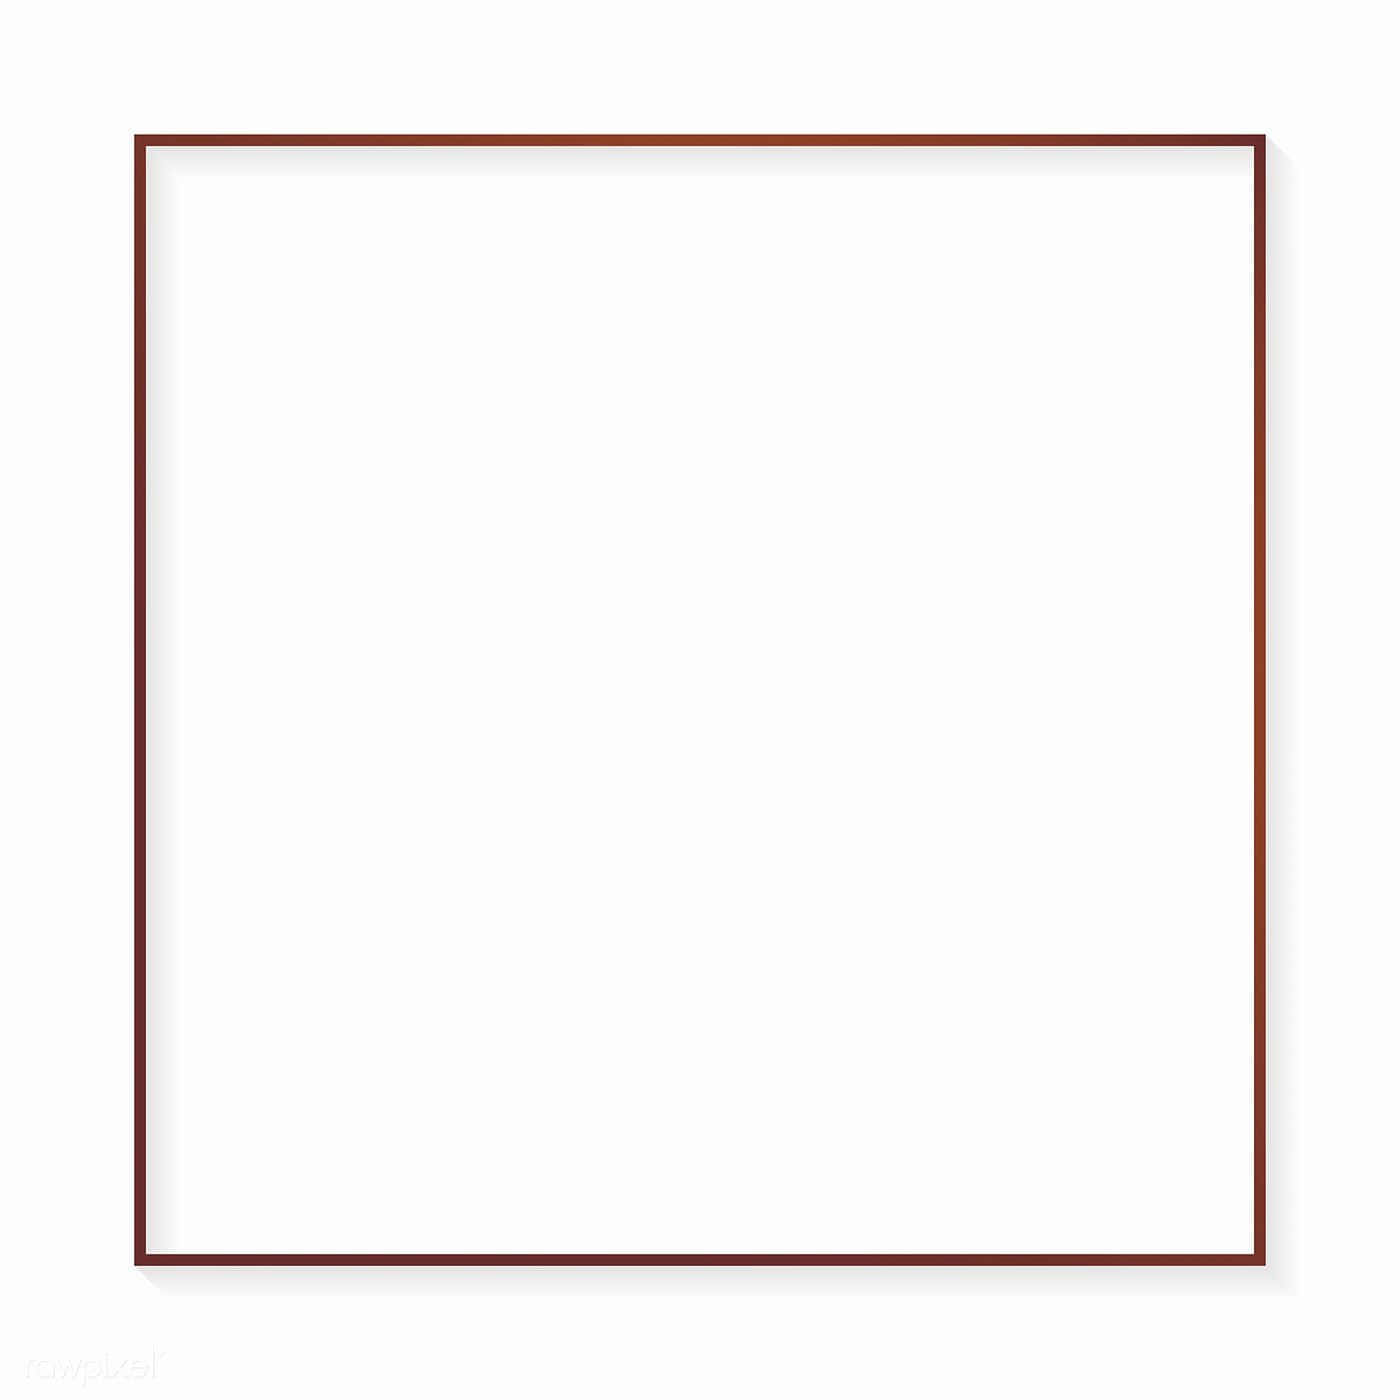 A Square Frame With A Brown Frame On A White Background